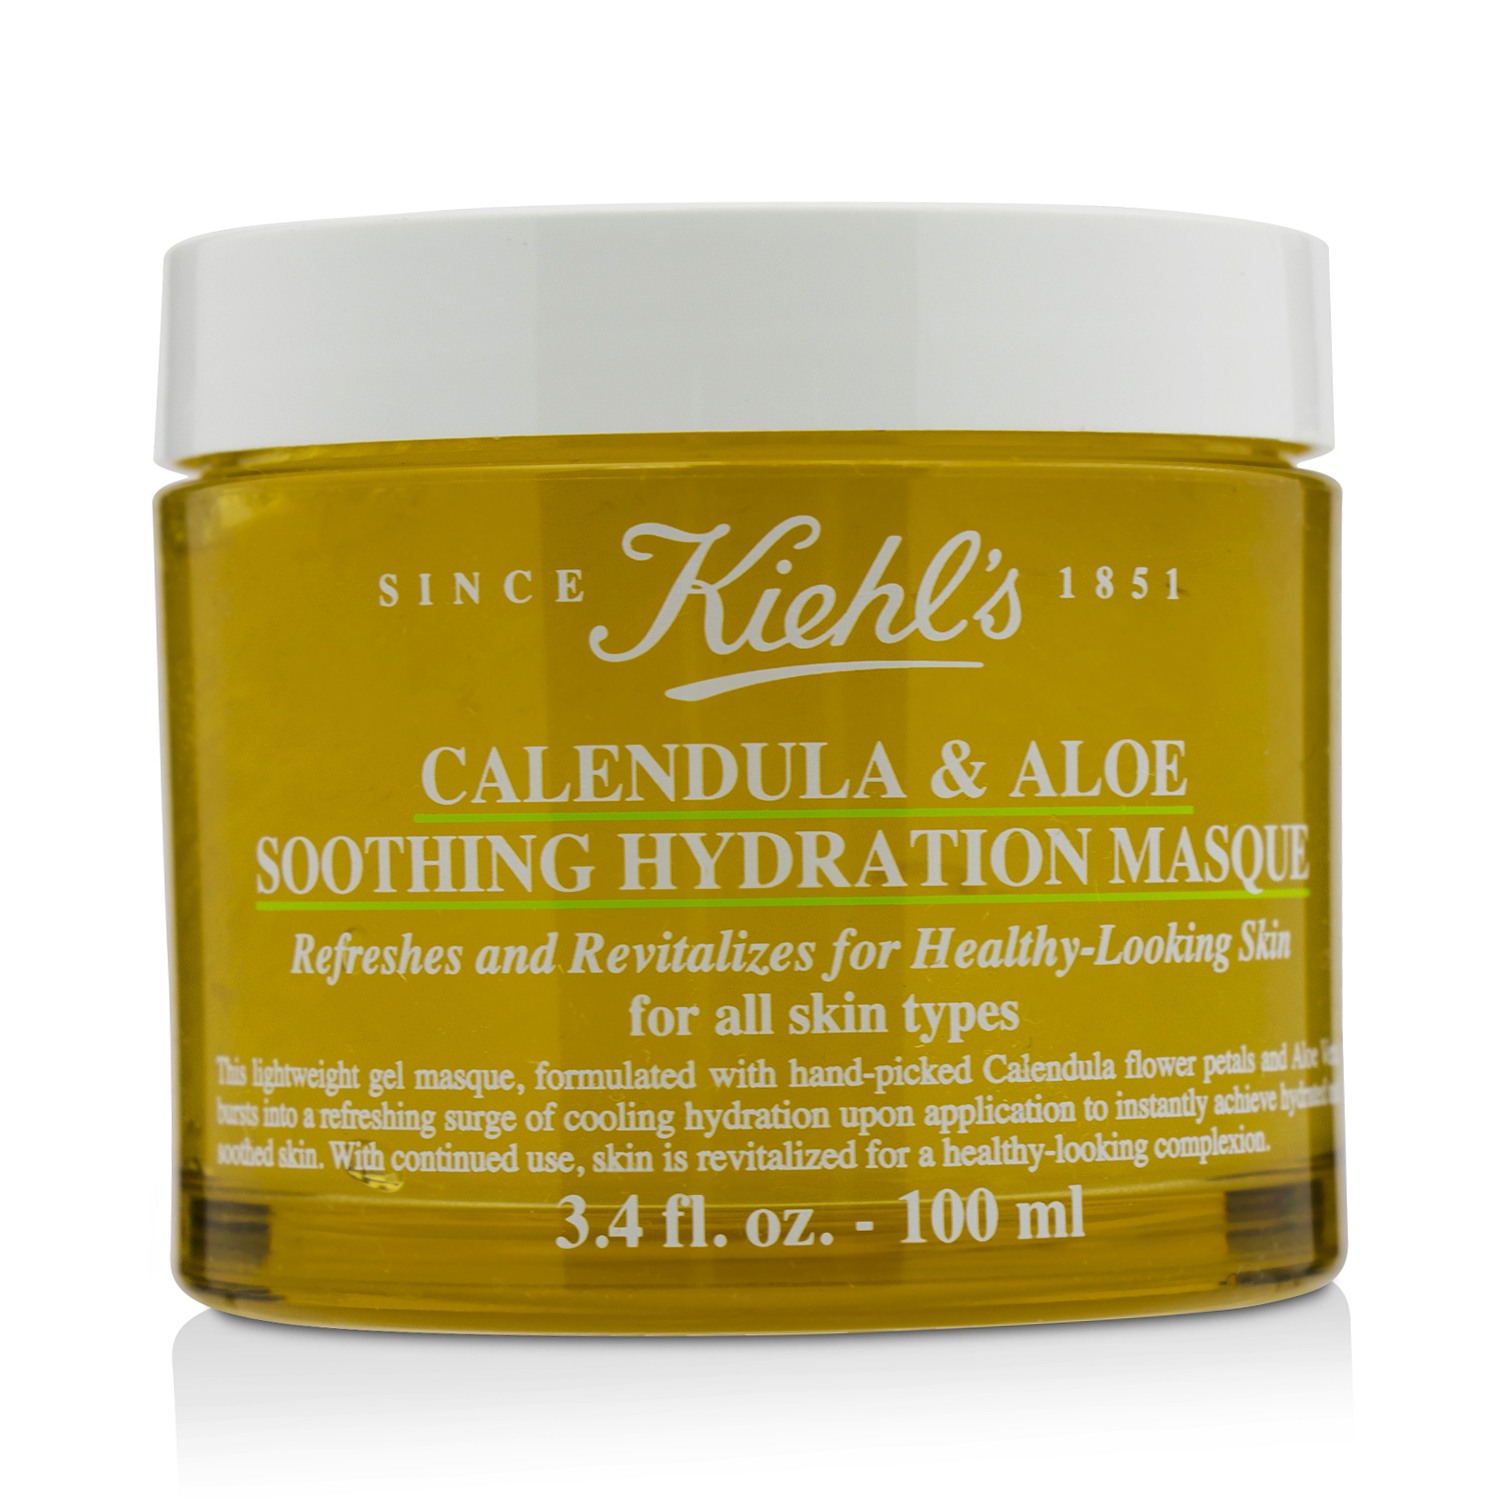 Calendula & Aloe Soothing Hydration Masque - For All Skin Types Kiehls Image